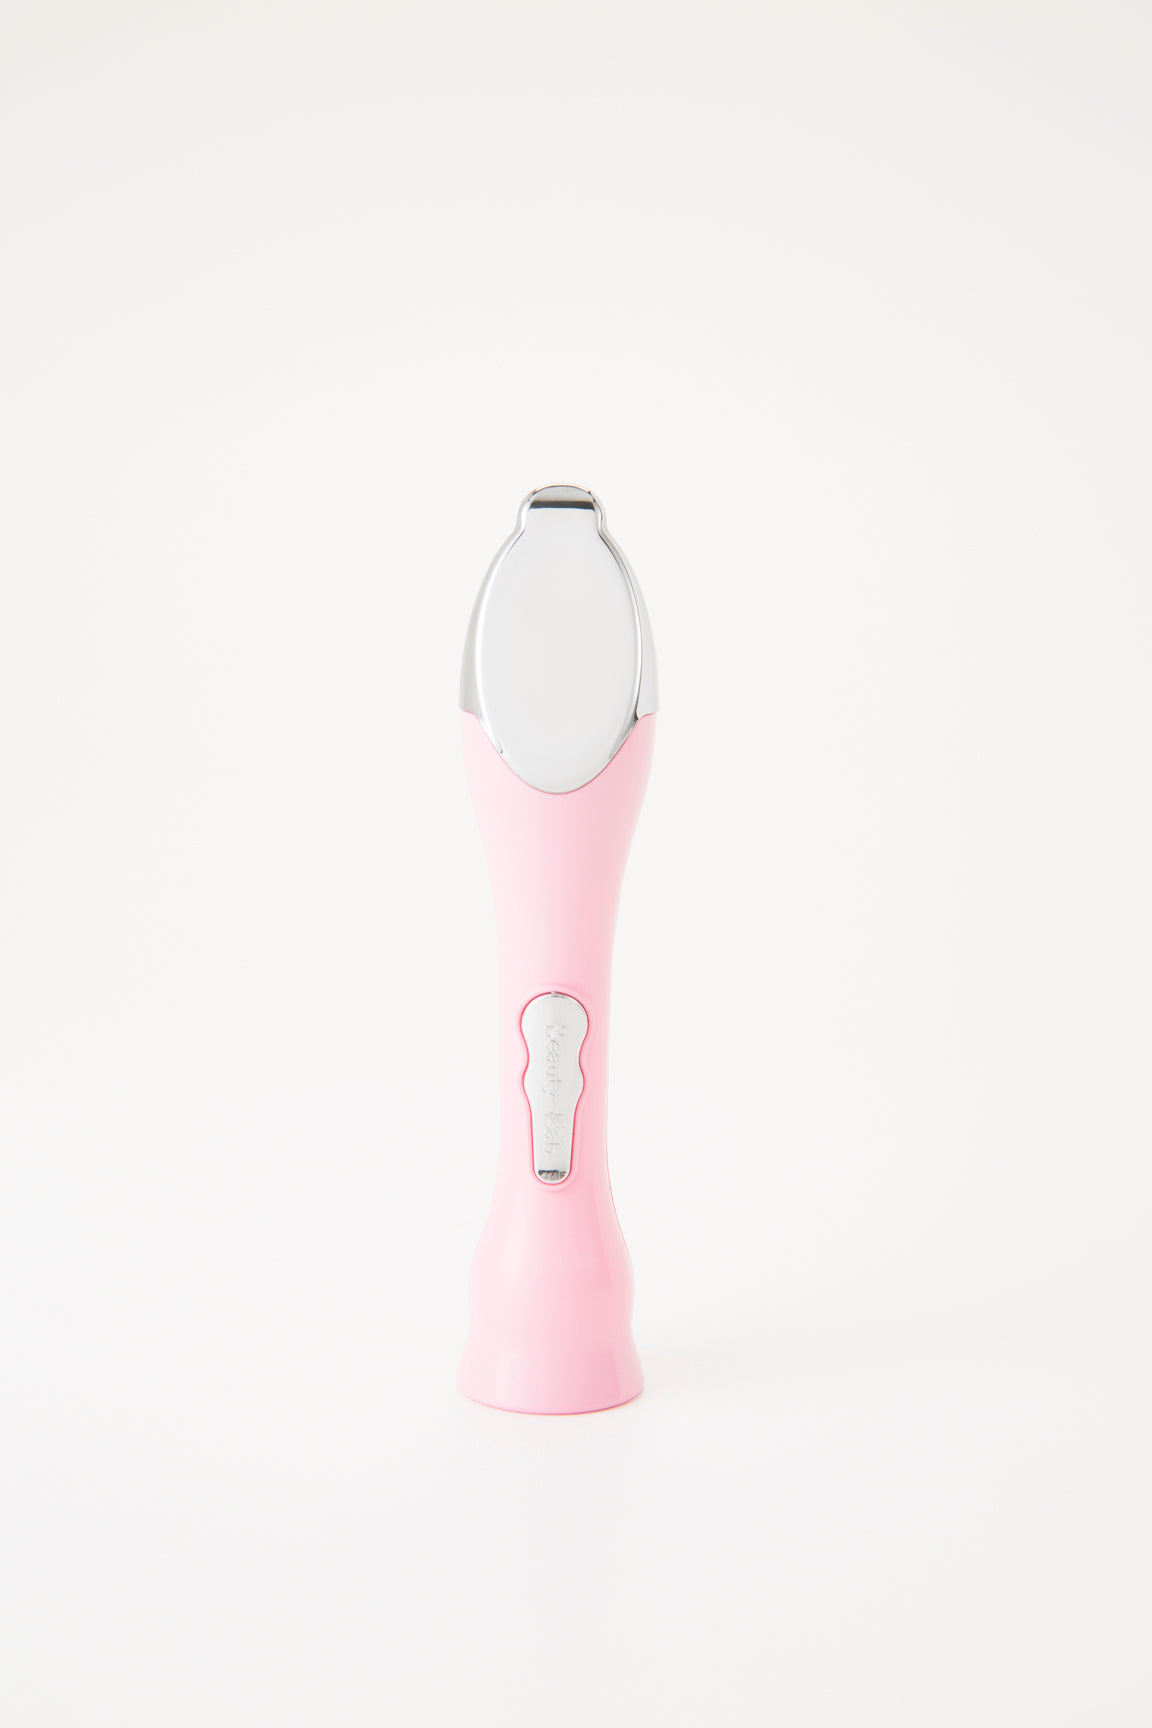 BEAUTY LAB Galvanic Ion Massager - Dotrade Express. Trusted Korea Manufacturers. Find the best Korean Brands